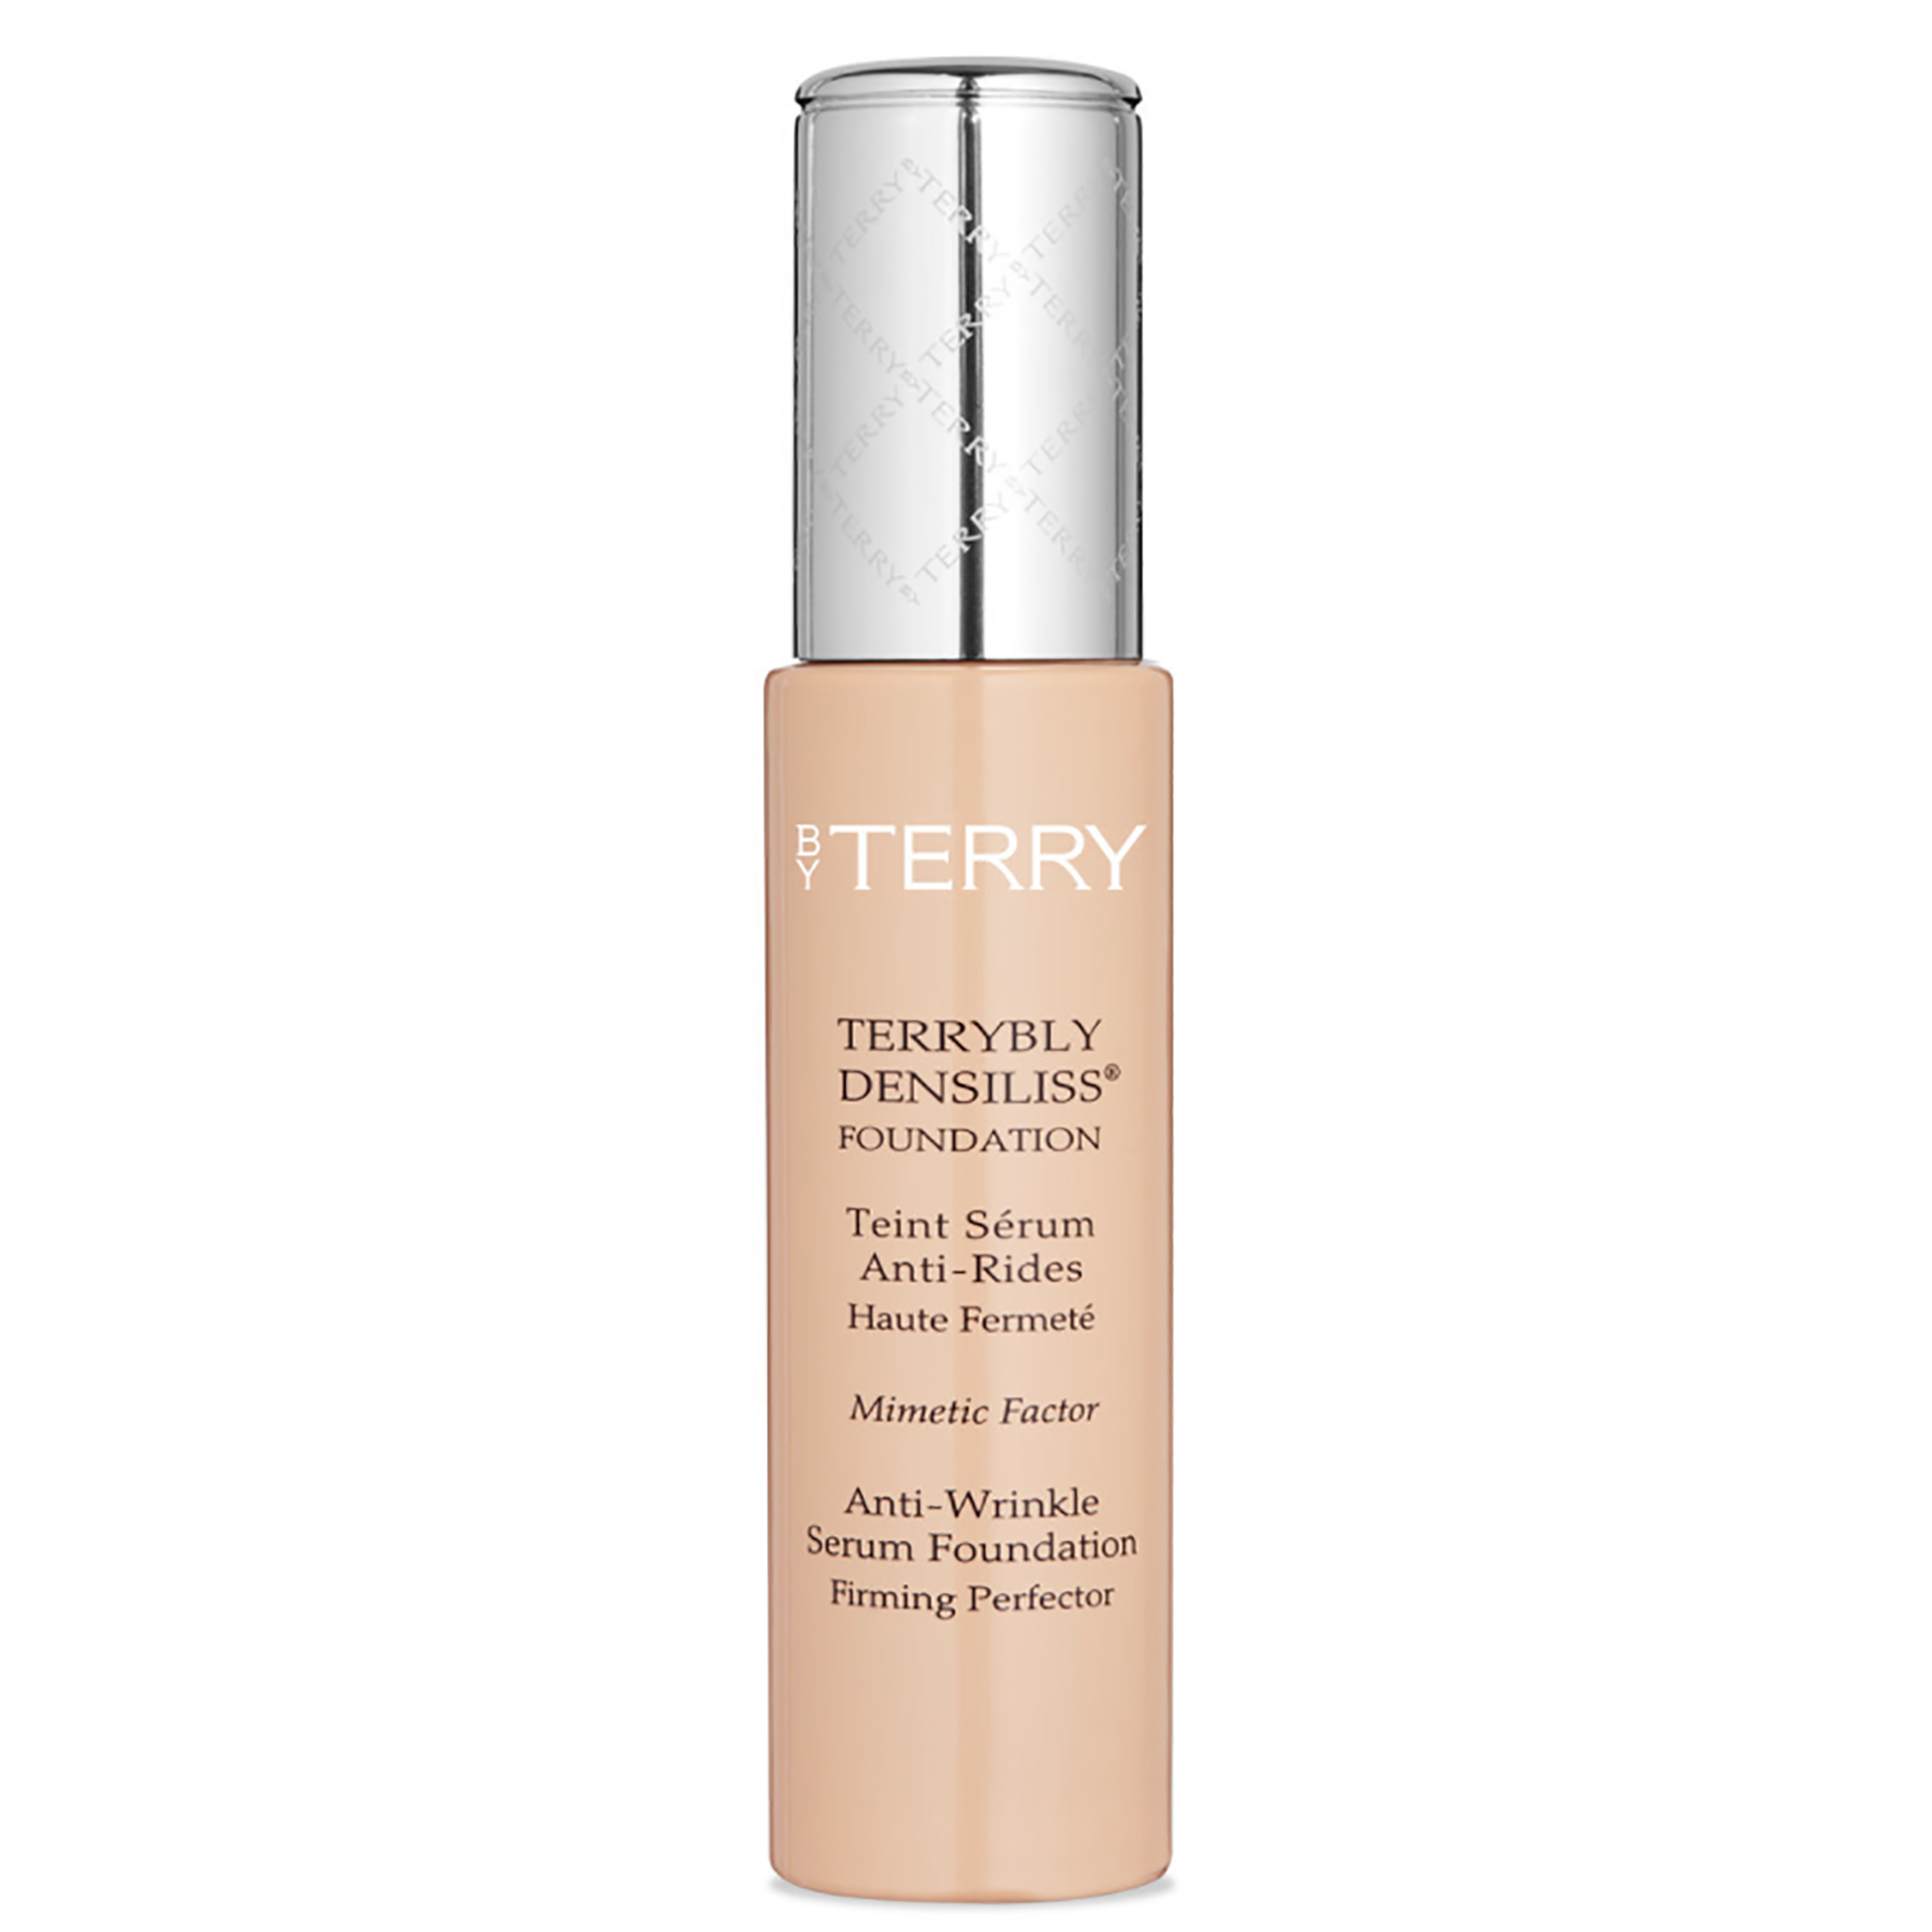 By Terry Terrybly Densiliss Anti-Wrinkle Serum Foundation #8.25 Desert Beige